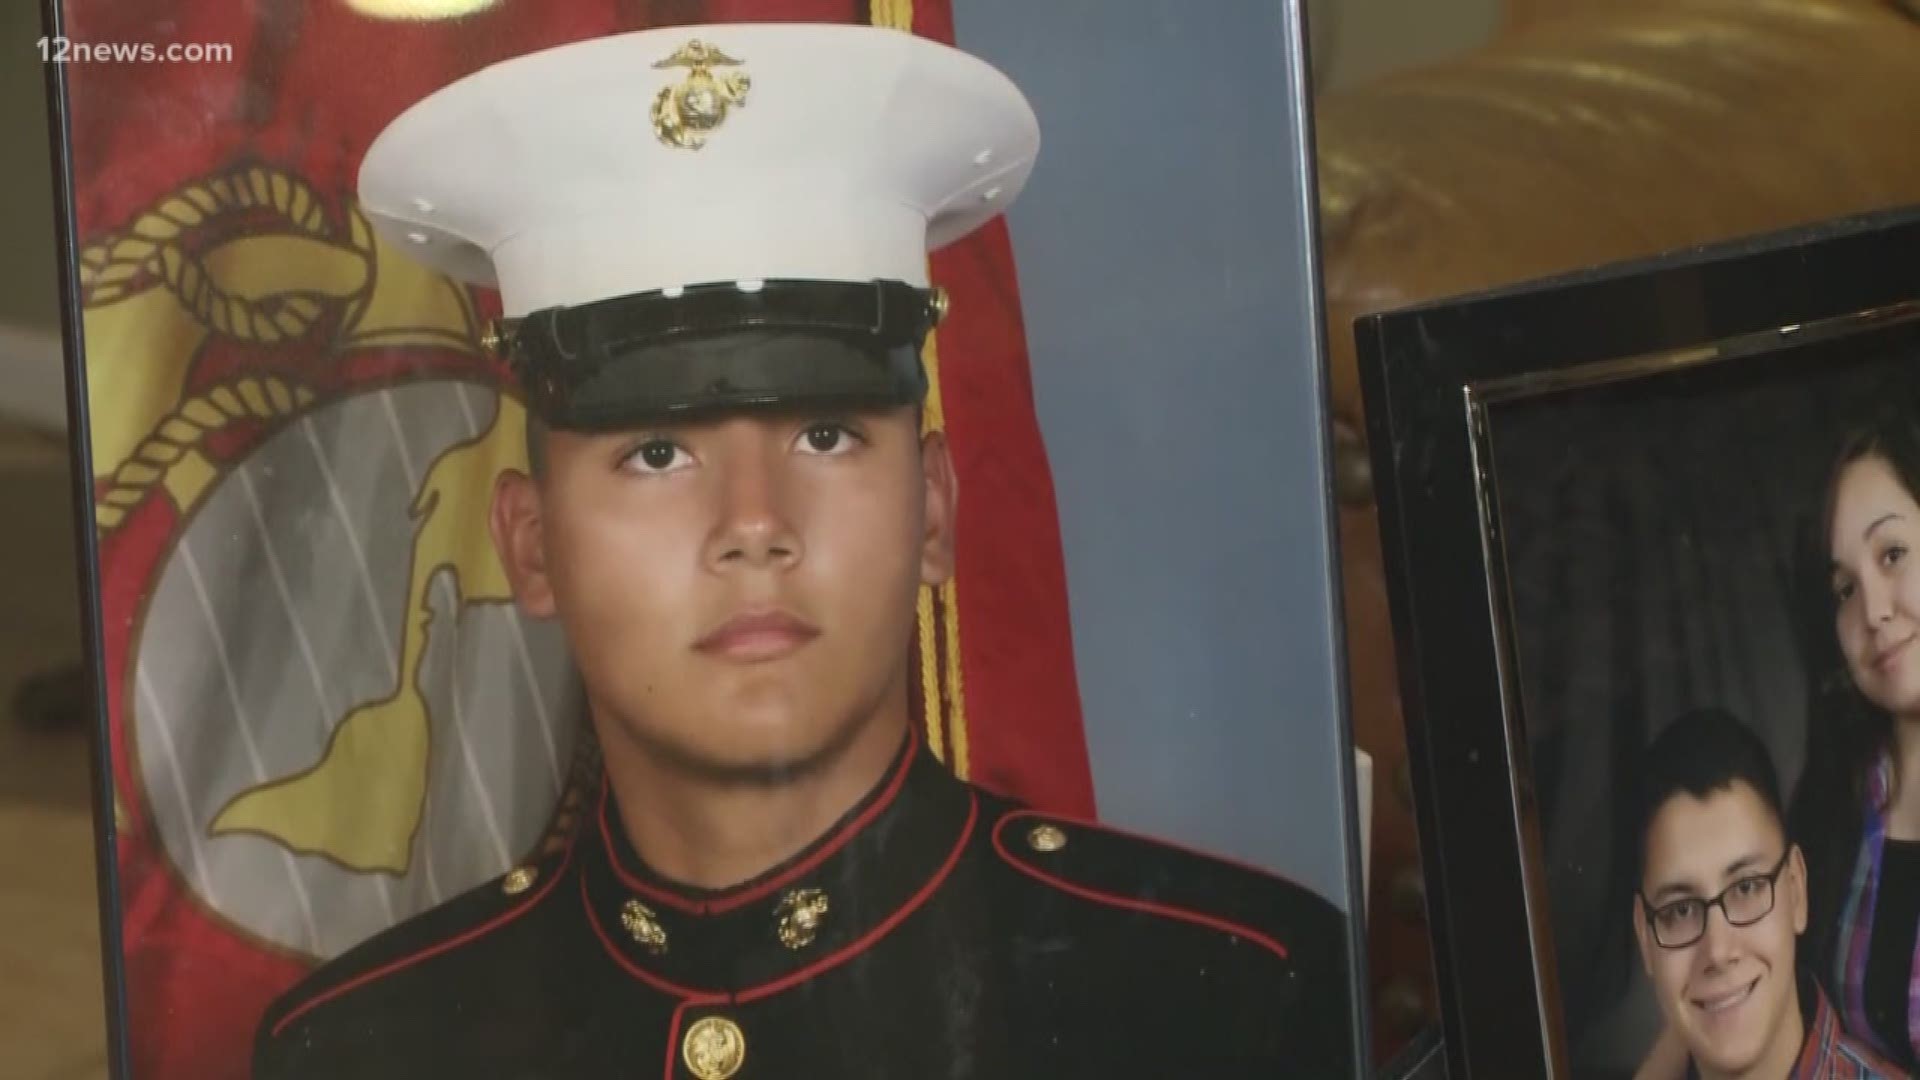 A Valley mom wants nothing more than to know where her son is after he disappeared serving in the United States Marine Corps just two weeks before Christmas.